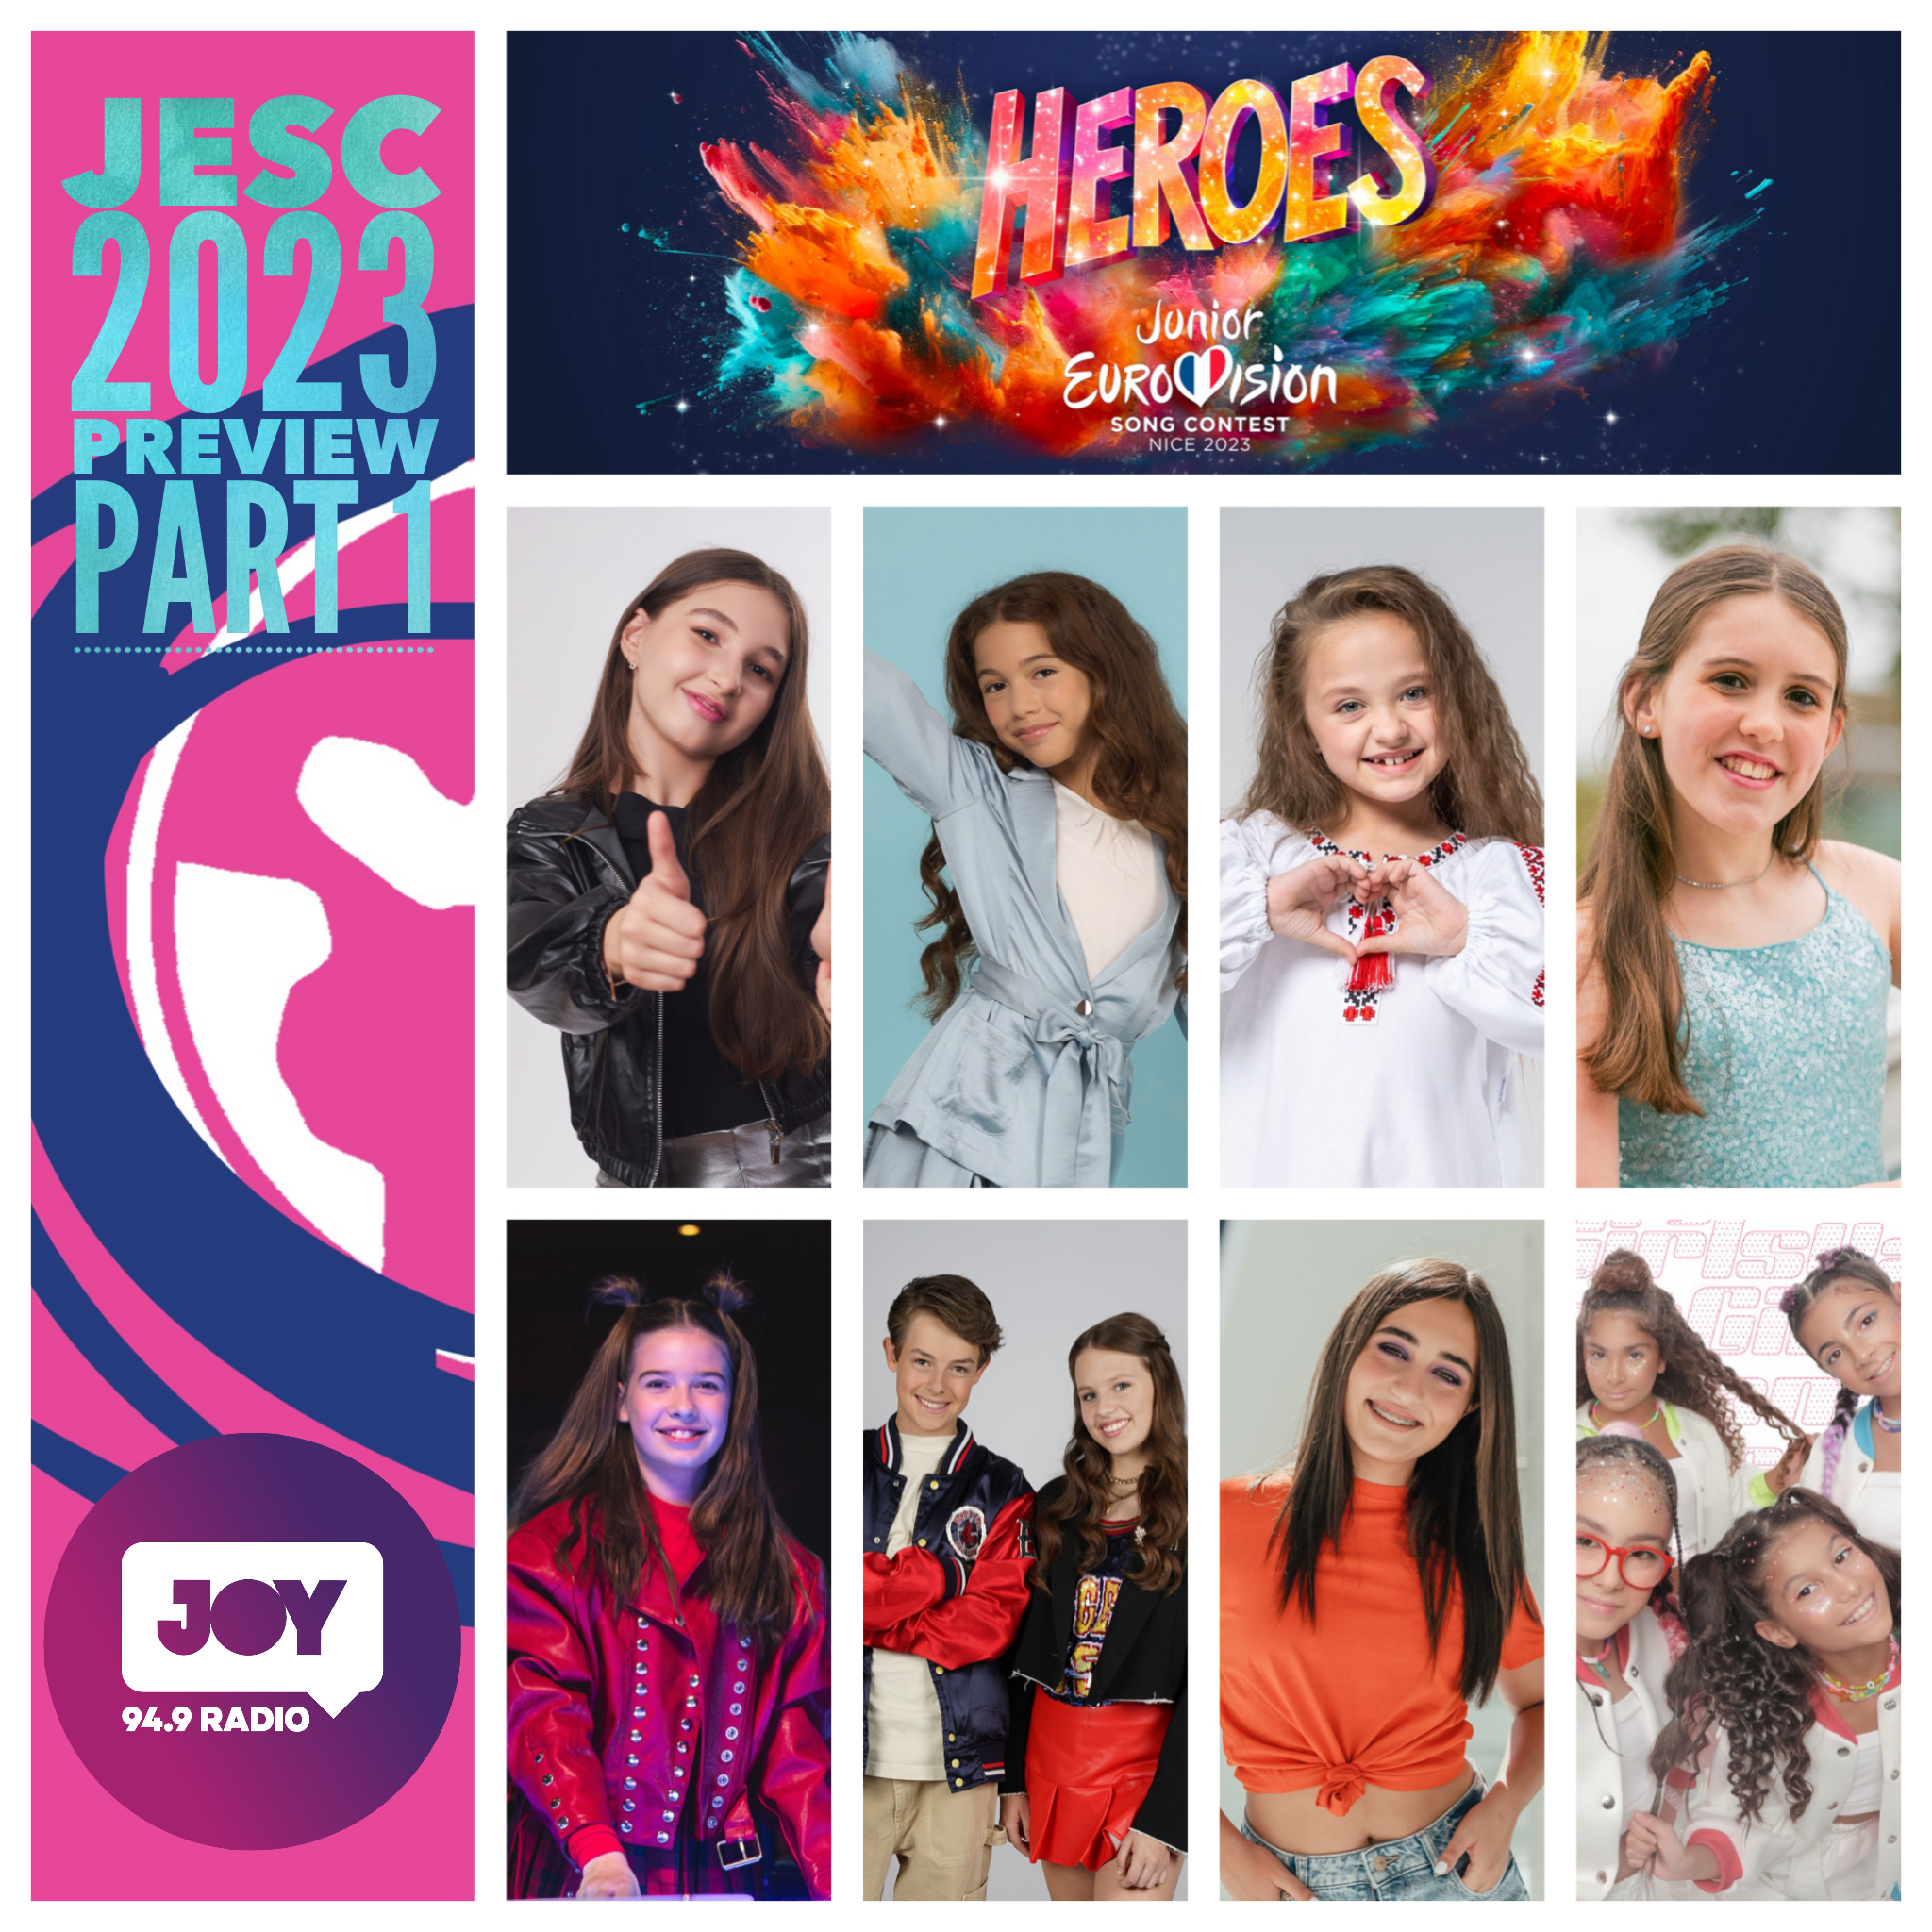 Three hundred and thirty-four – Junior Eurovision Song Contest 2023 Preview (Part 1)